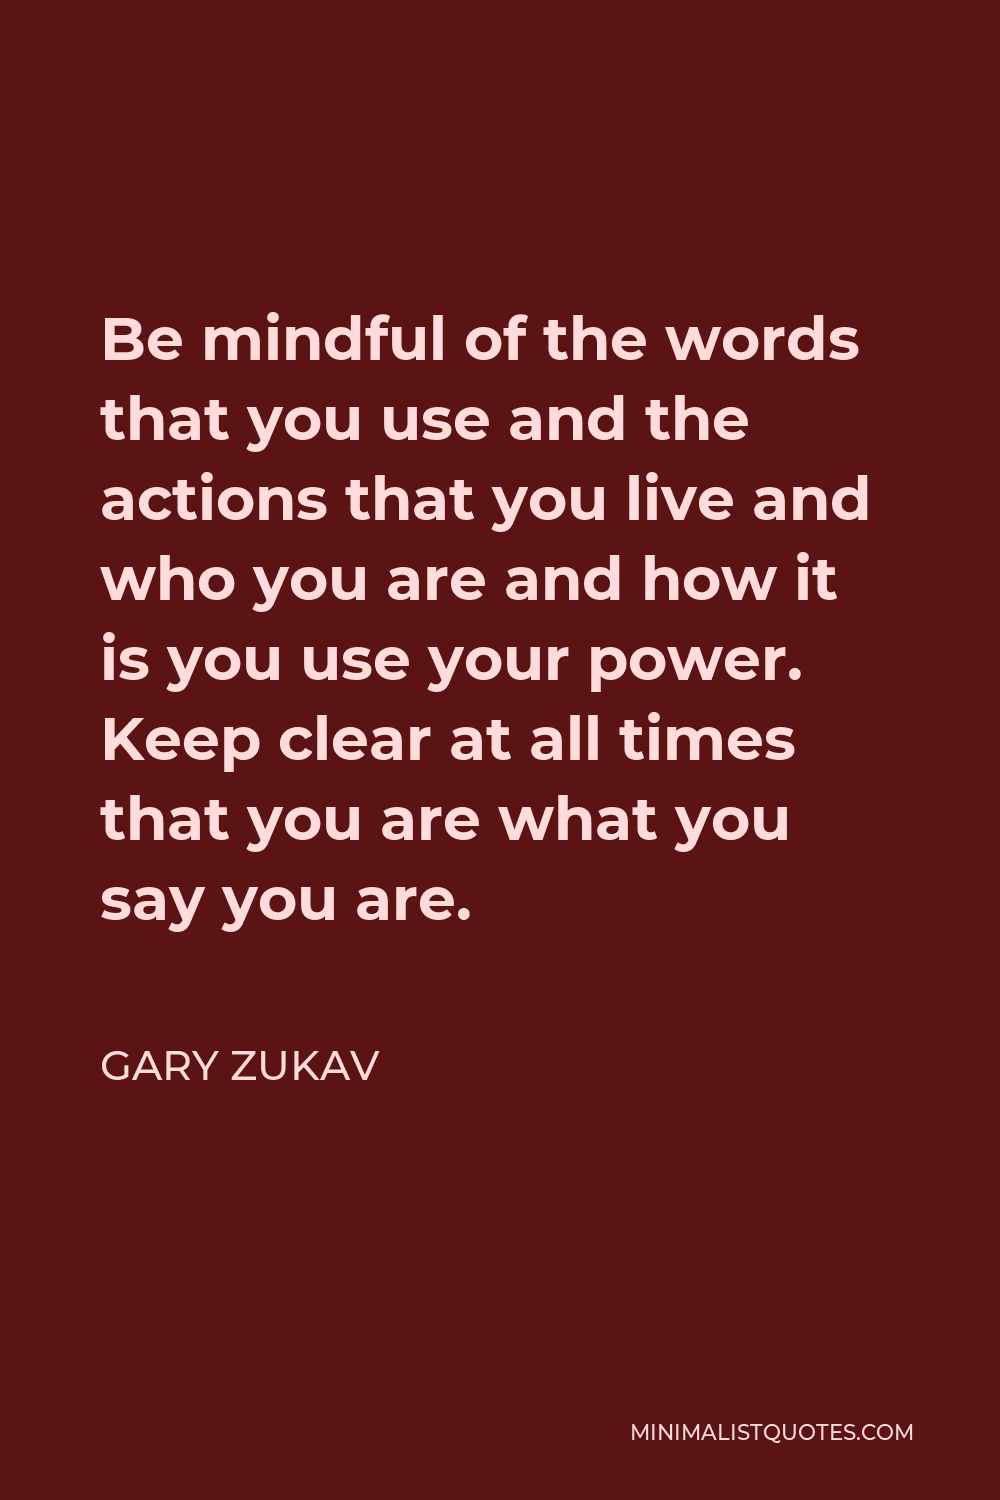 Gary Zukav Quote - Be mindful of the words that you use and the actions that you live and who you are and how it is you use your power. Keep clear at all times that you are what you say you are.